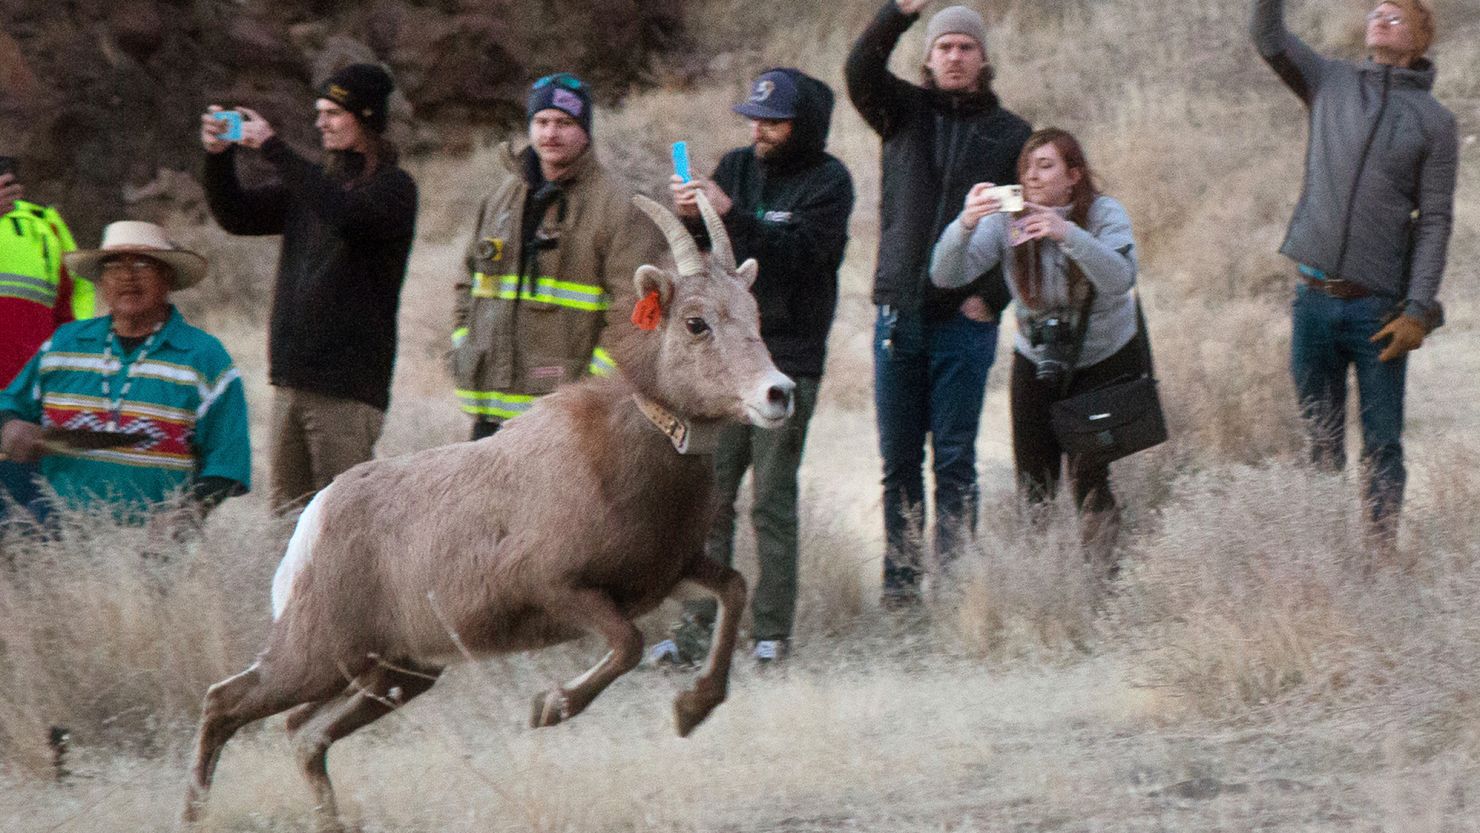 Nevada wildlife officials and the Pyramid Lake Paiute Tribe released 21 bighorn sheep in the hills of Pyramid Lake, where they haven't lived since the start of the 20th century. Judging by their euphoric gallops, the sheep like their new habitat just fine. 